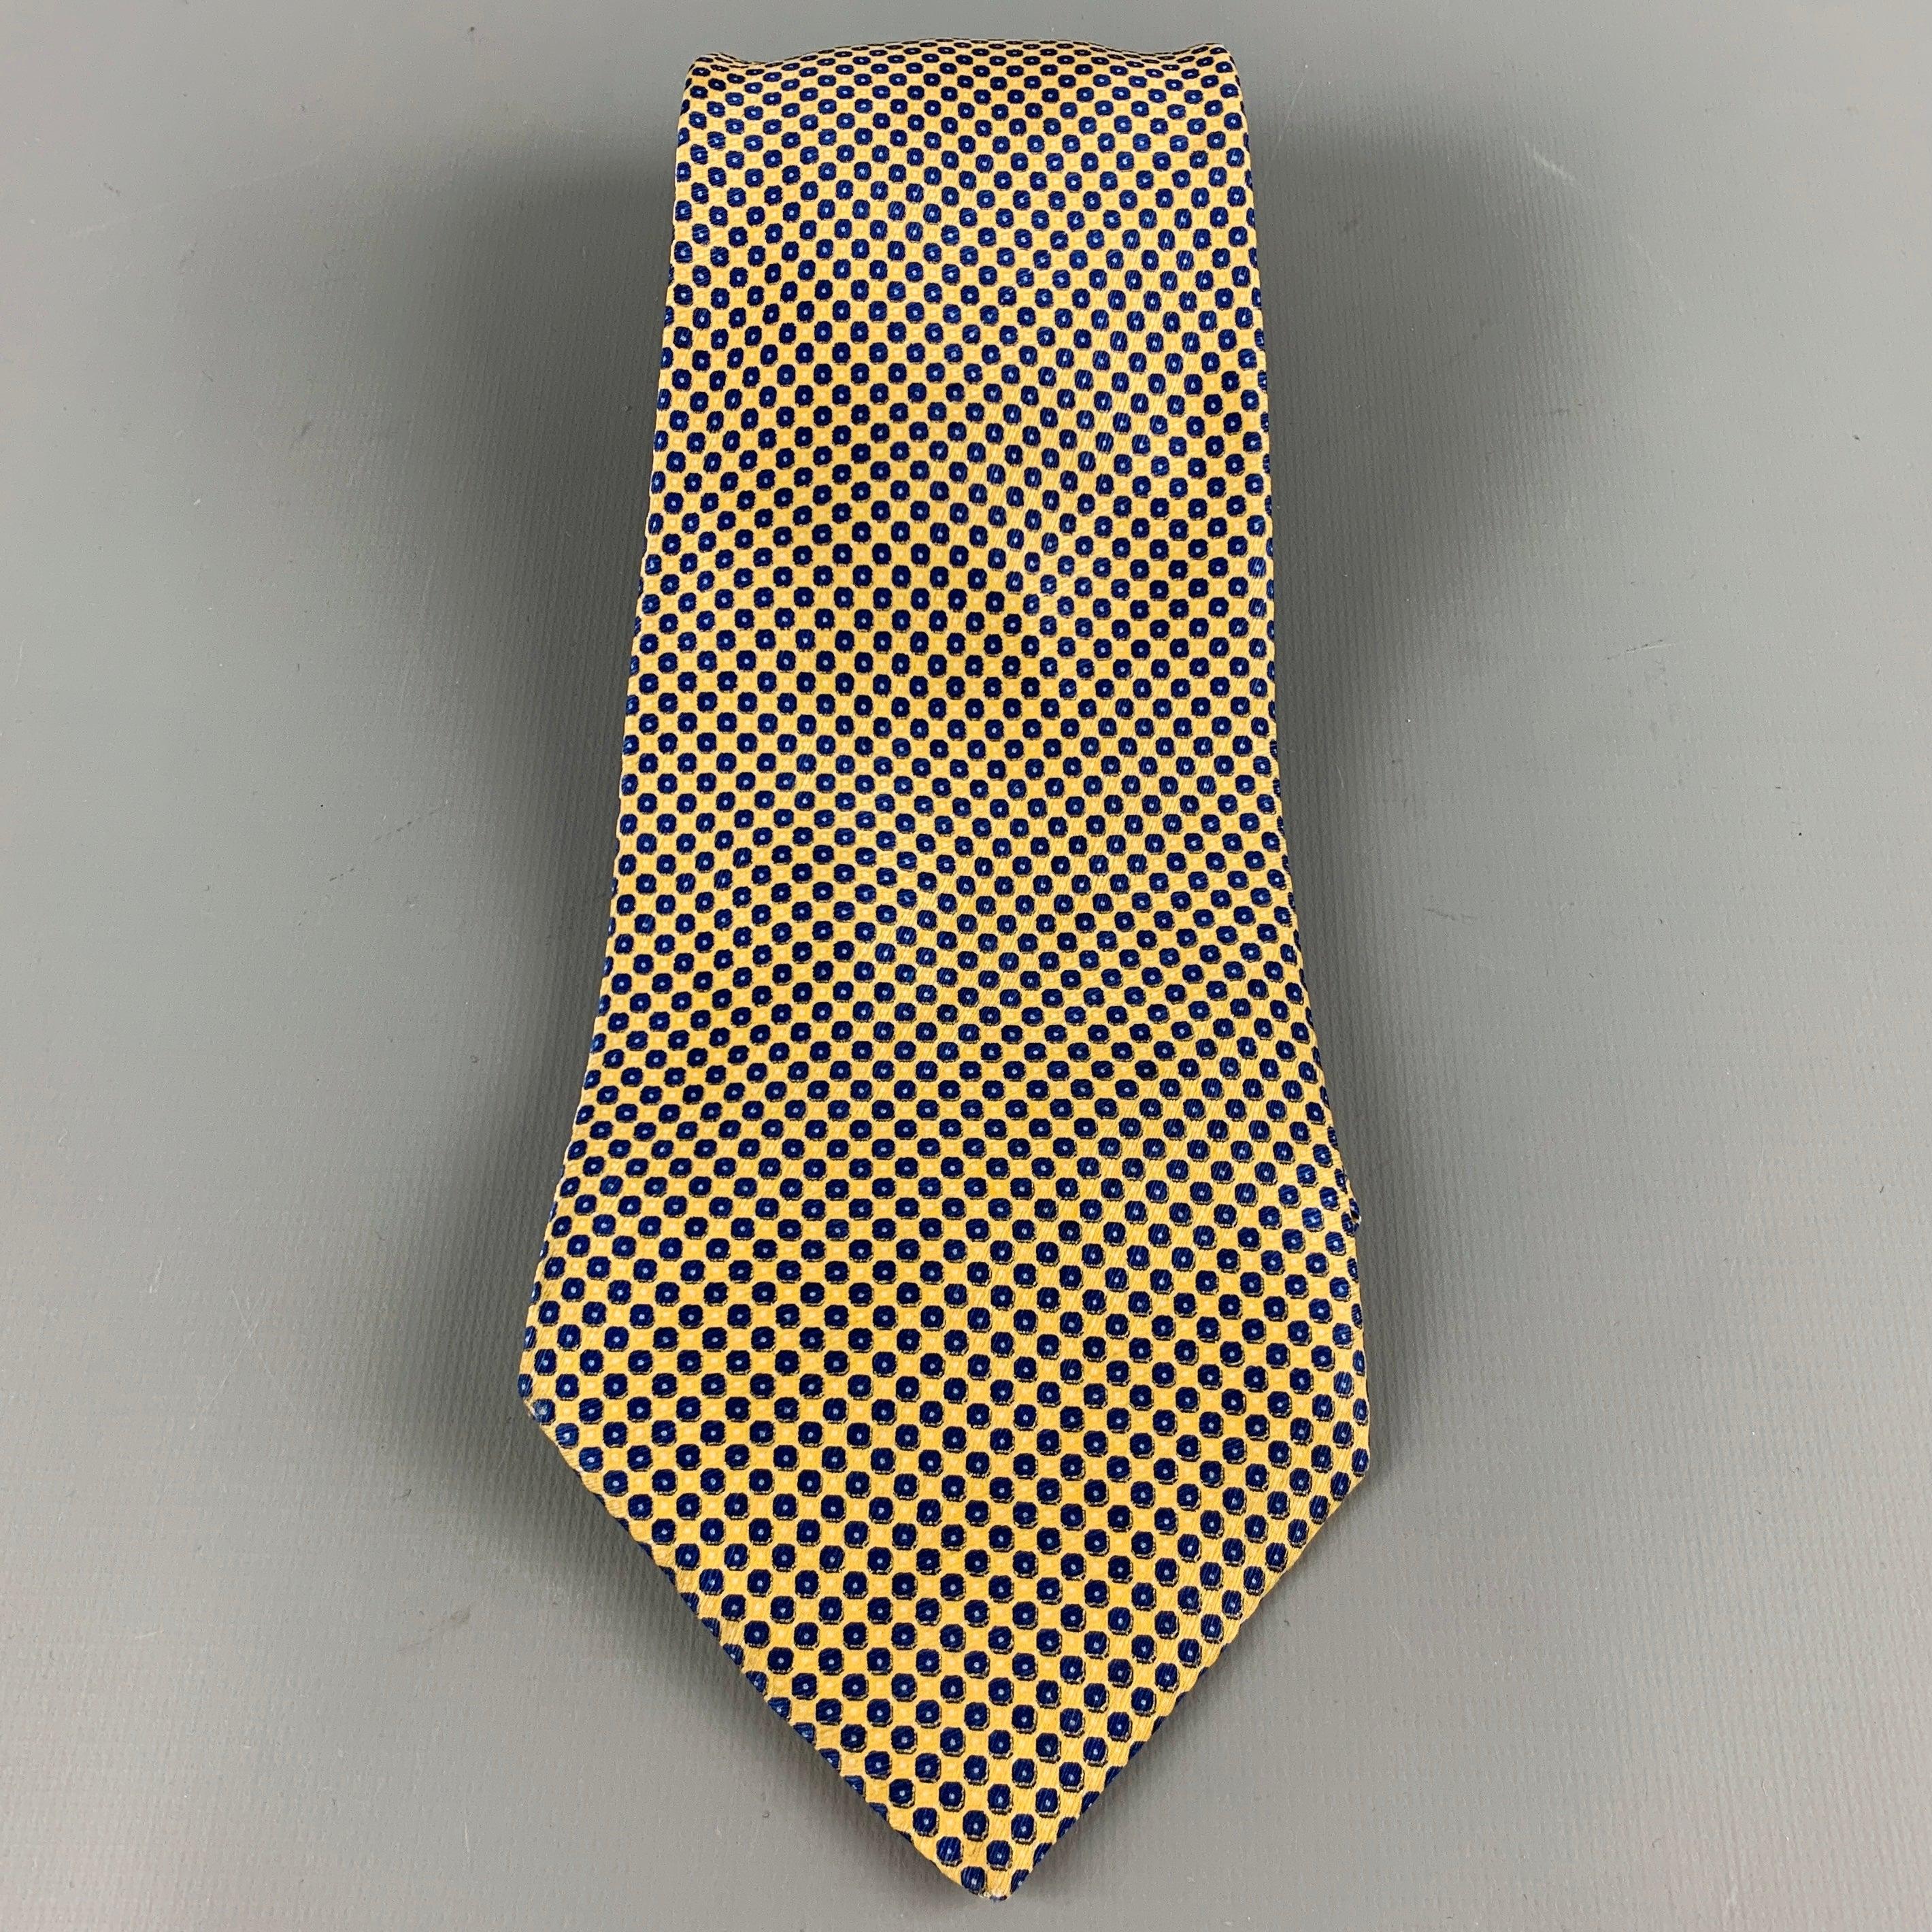 STEFANO RICCI
necktie in a yellow and navy silk fabric featuring a nailhead pattern.Good Pre-Owned Condition. Moderate discoloration. 

Measurements: 
  Width: 4 inches Length: 62 inches 
  
  
 
Reference No.: 128761
Category: Tie
More Details
   